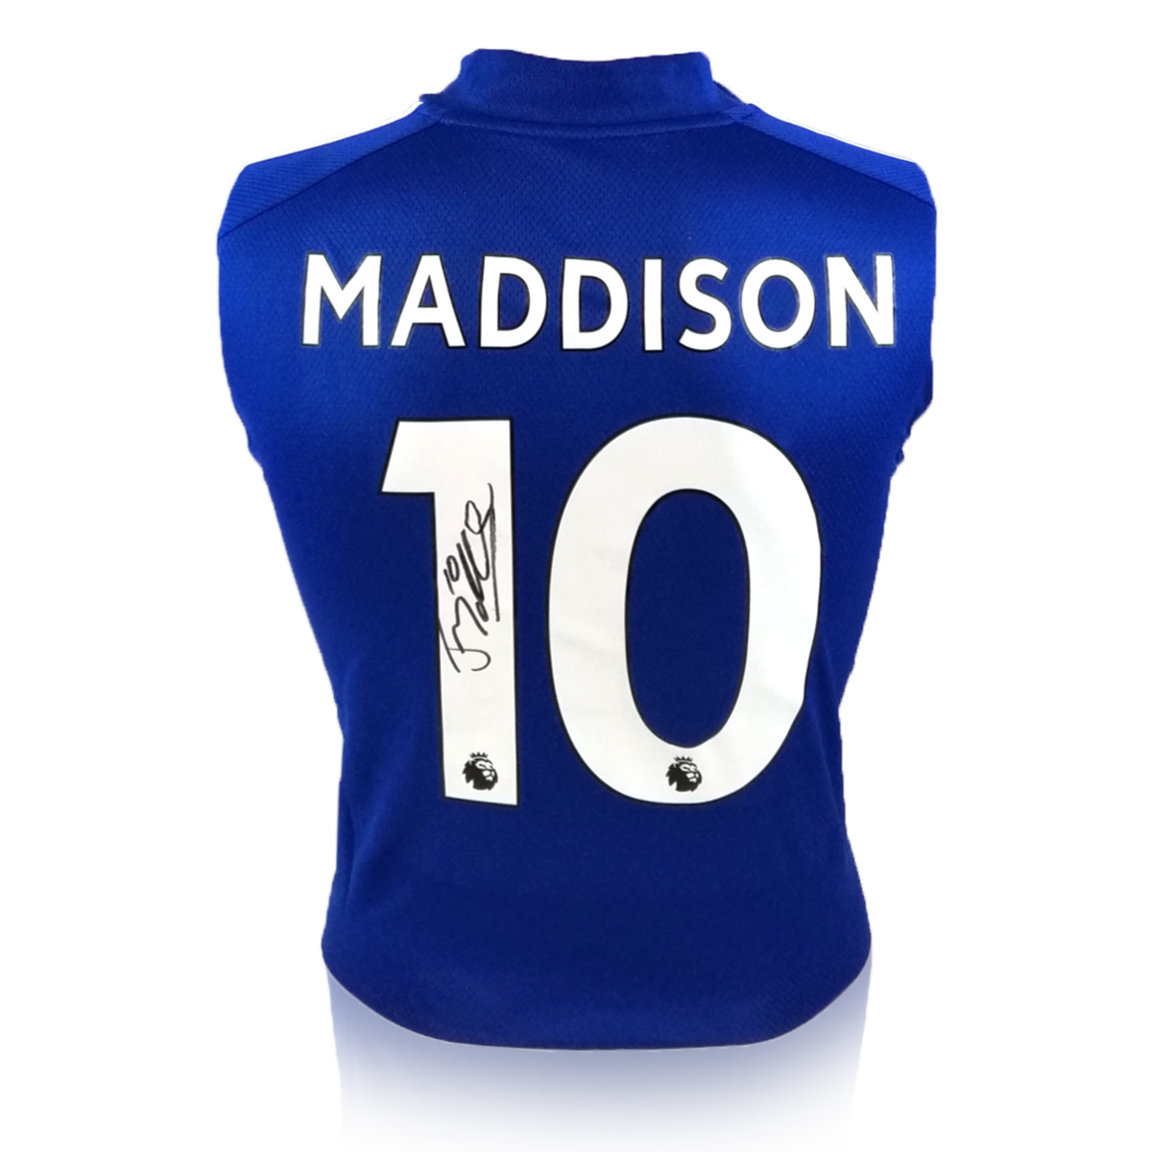 Leicester City's James Maddison Duffle Bag for Sale by Webbed Toe Design's